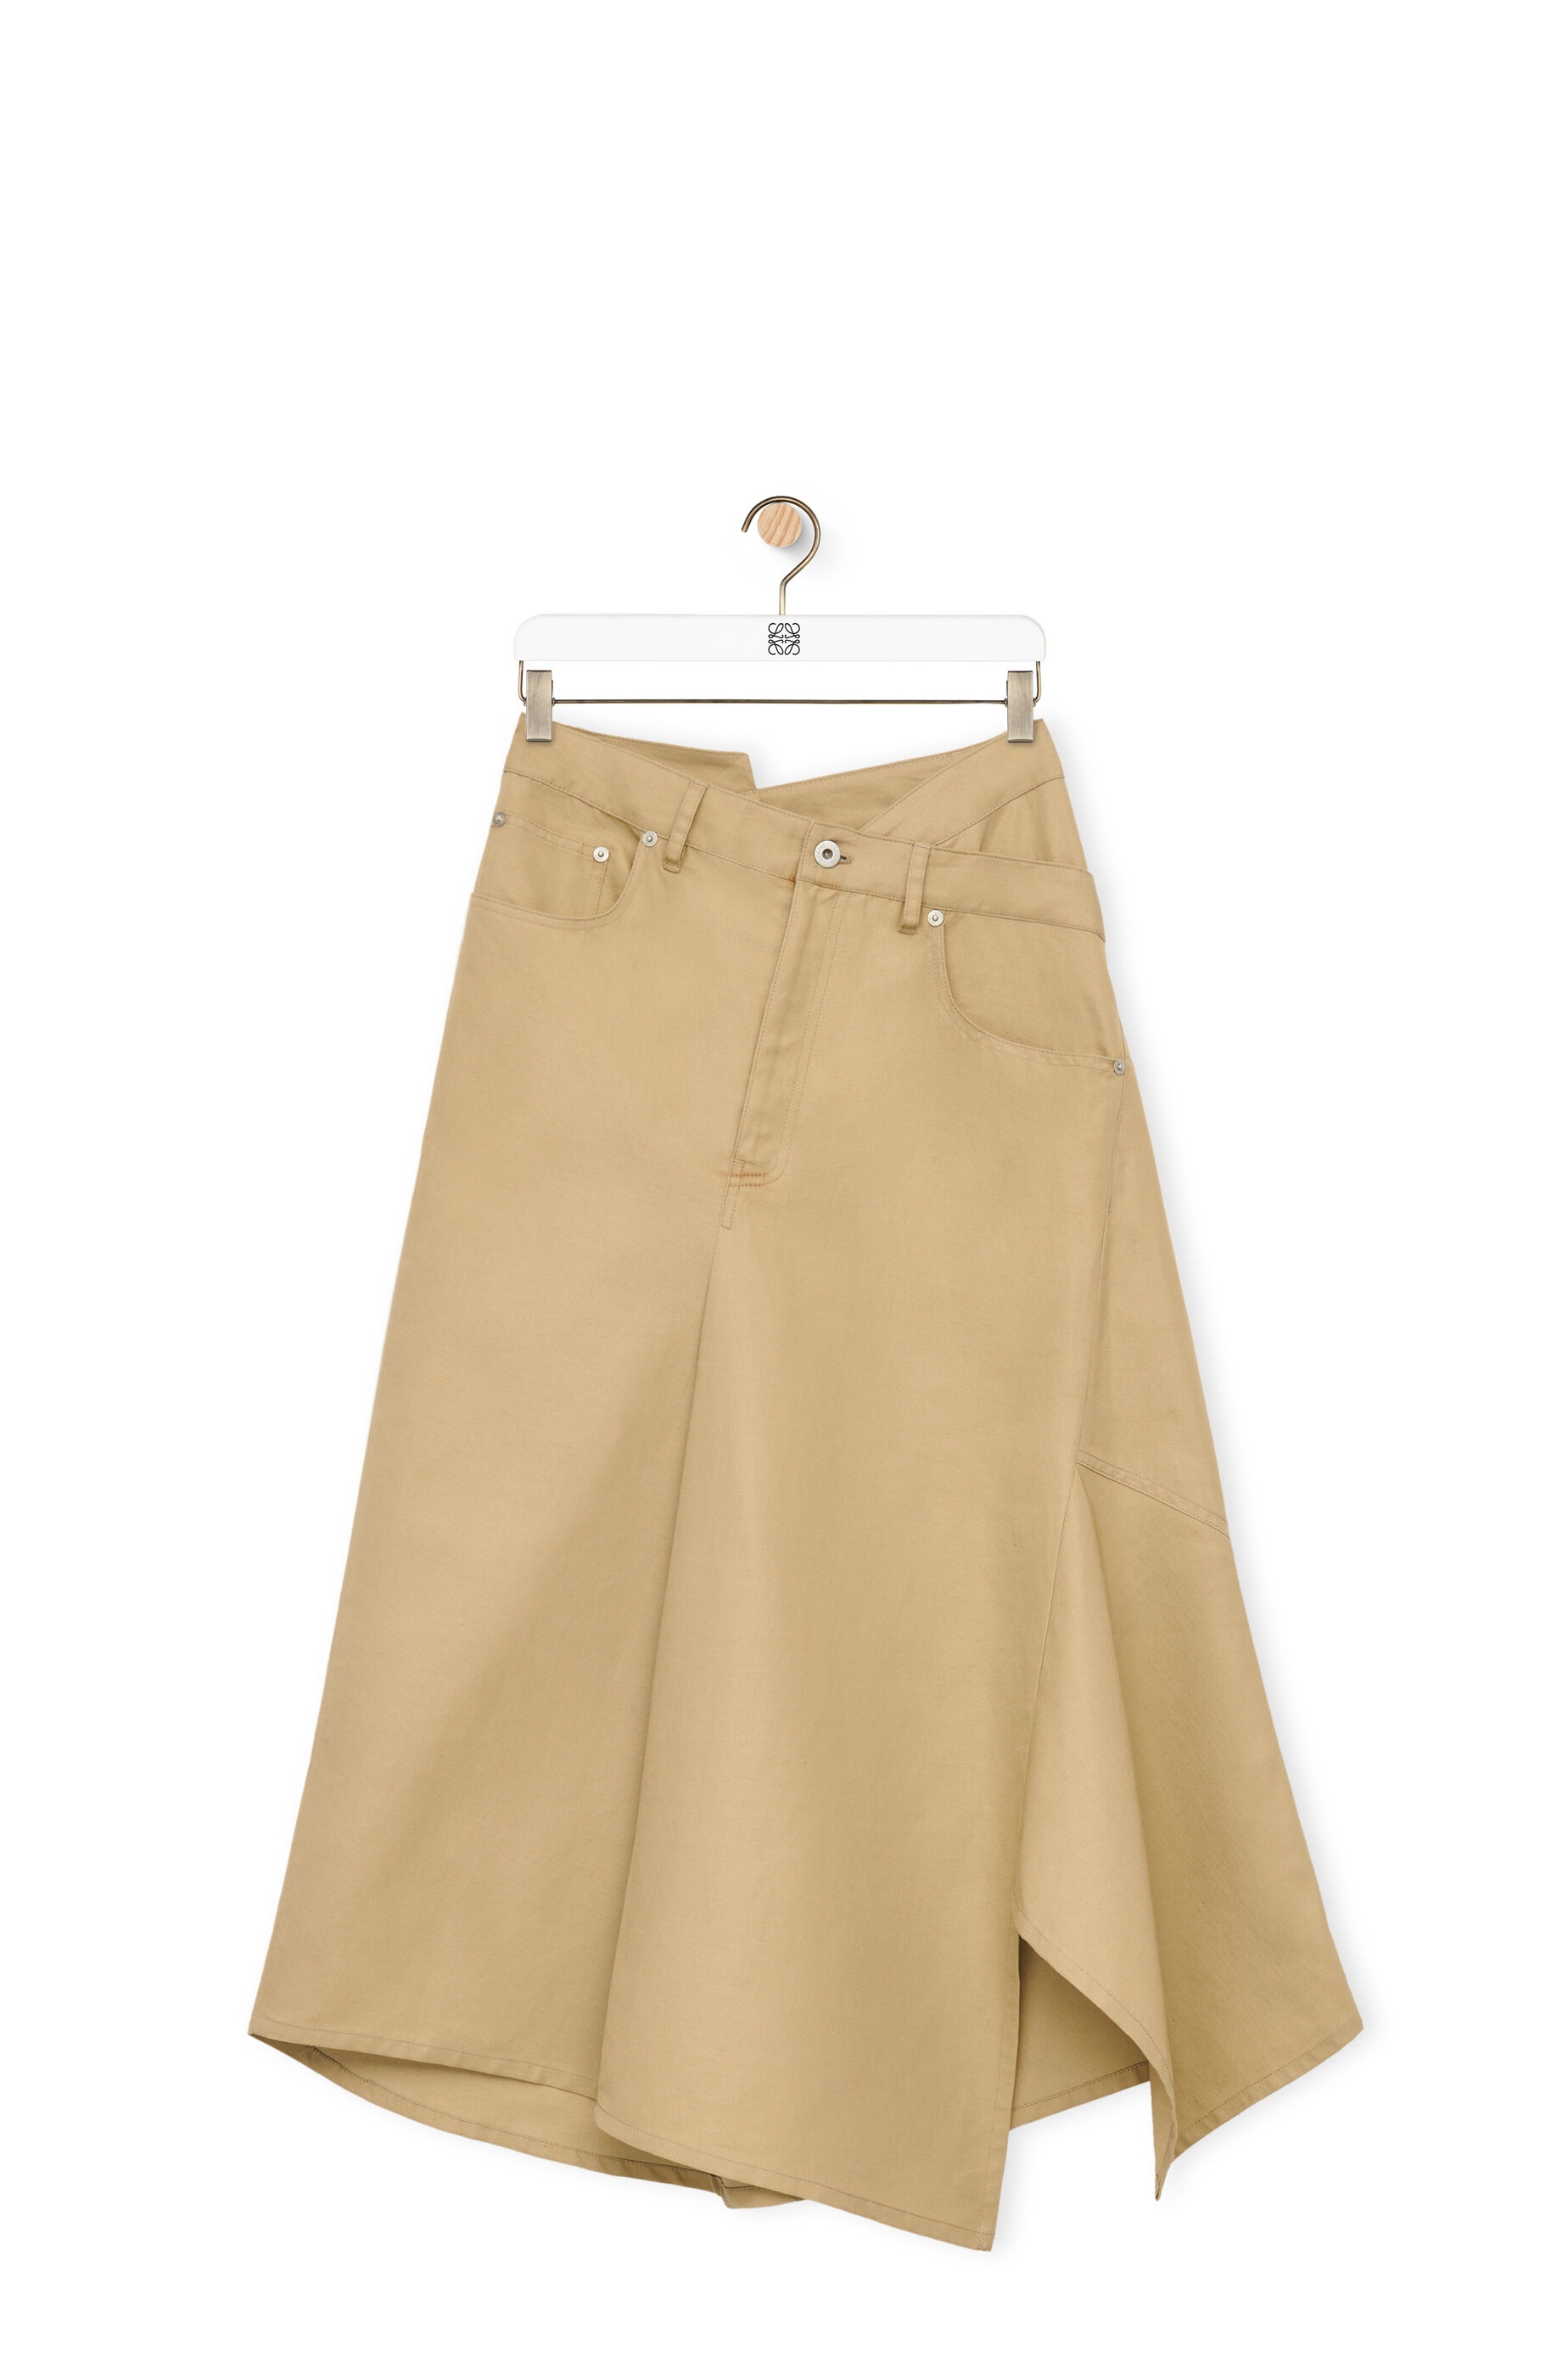 Deconstructed midi skirt in cotton and linen - 1